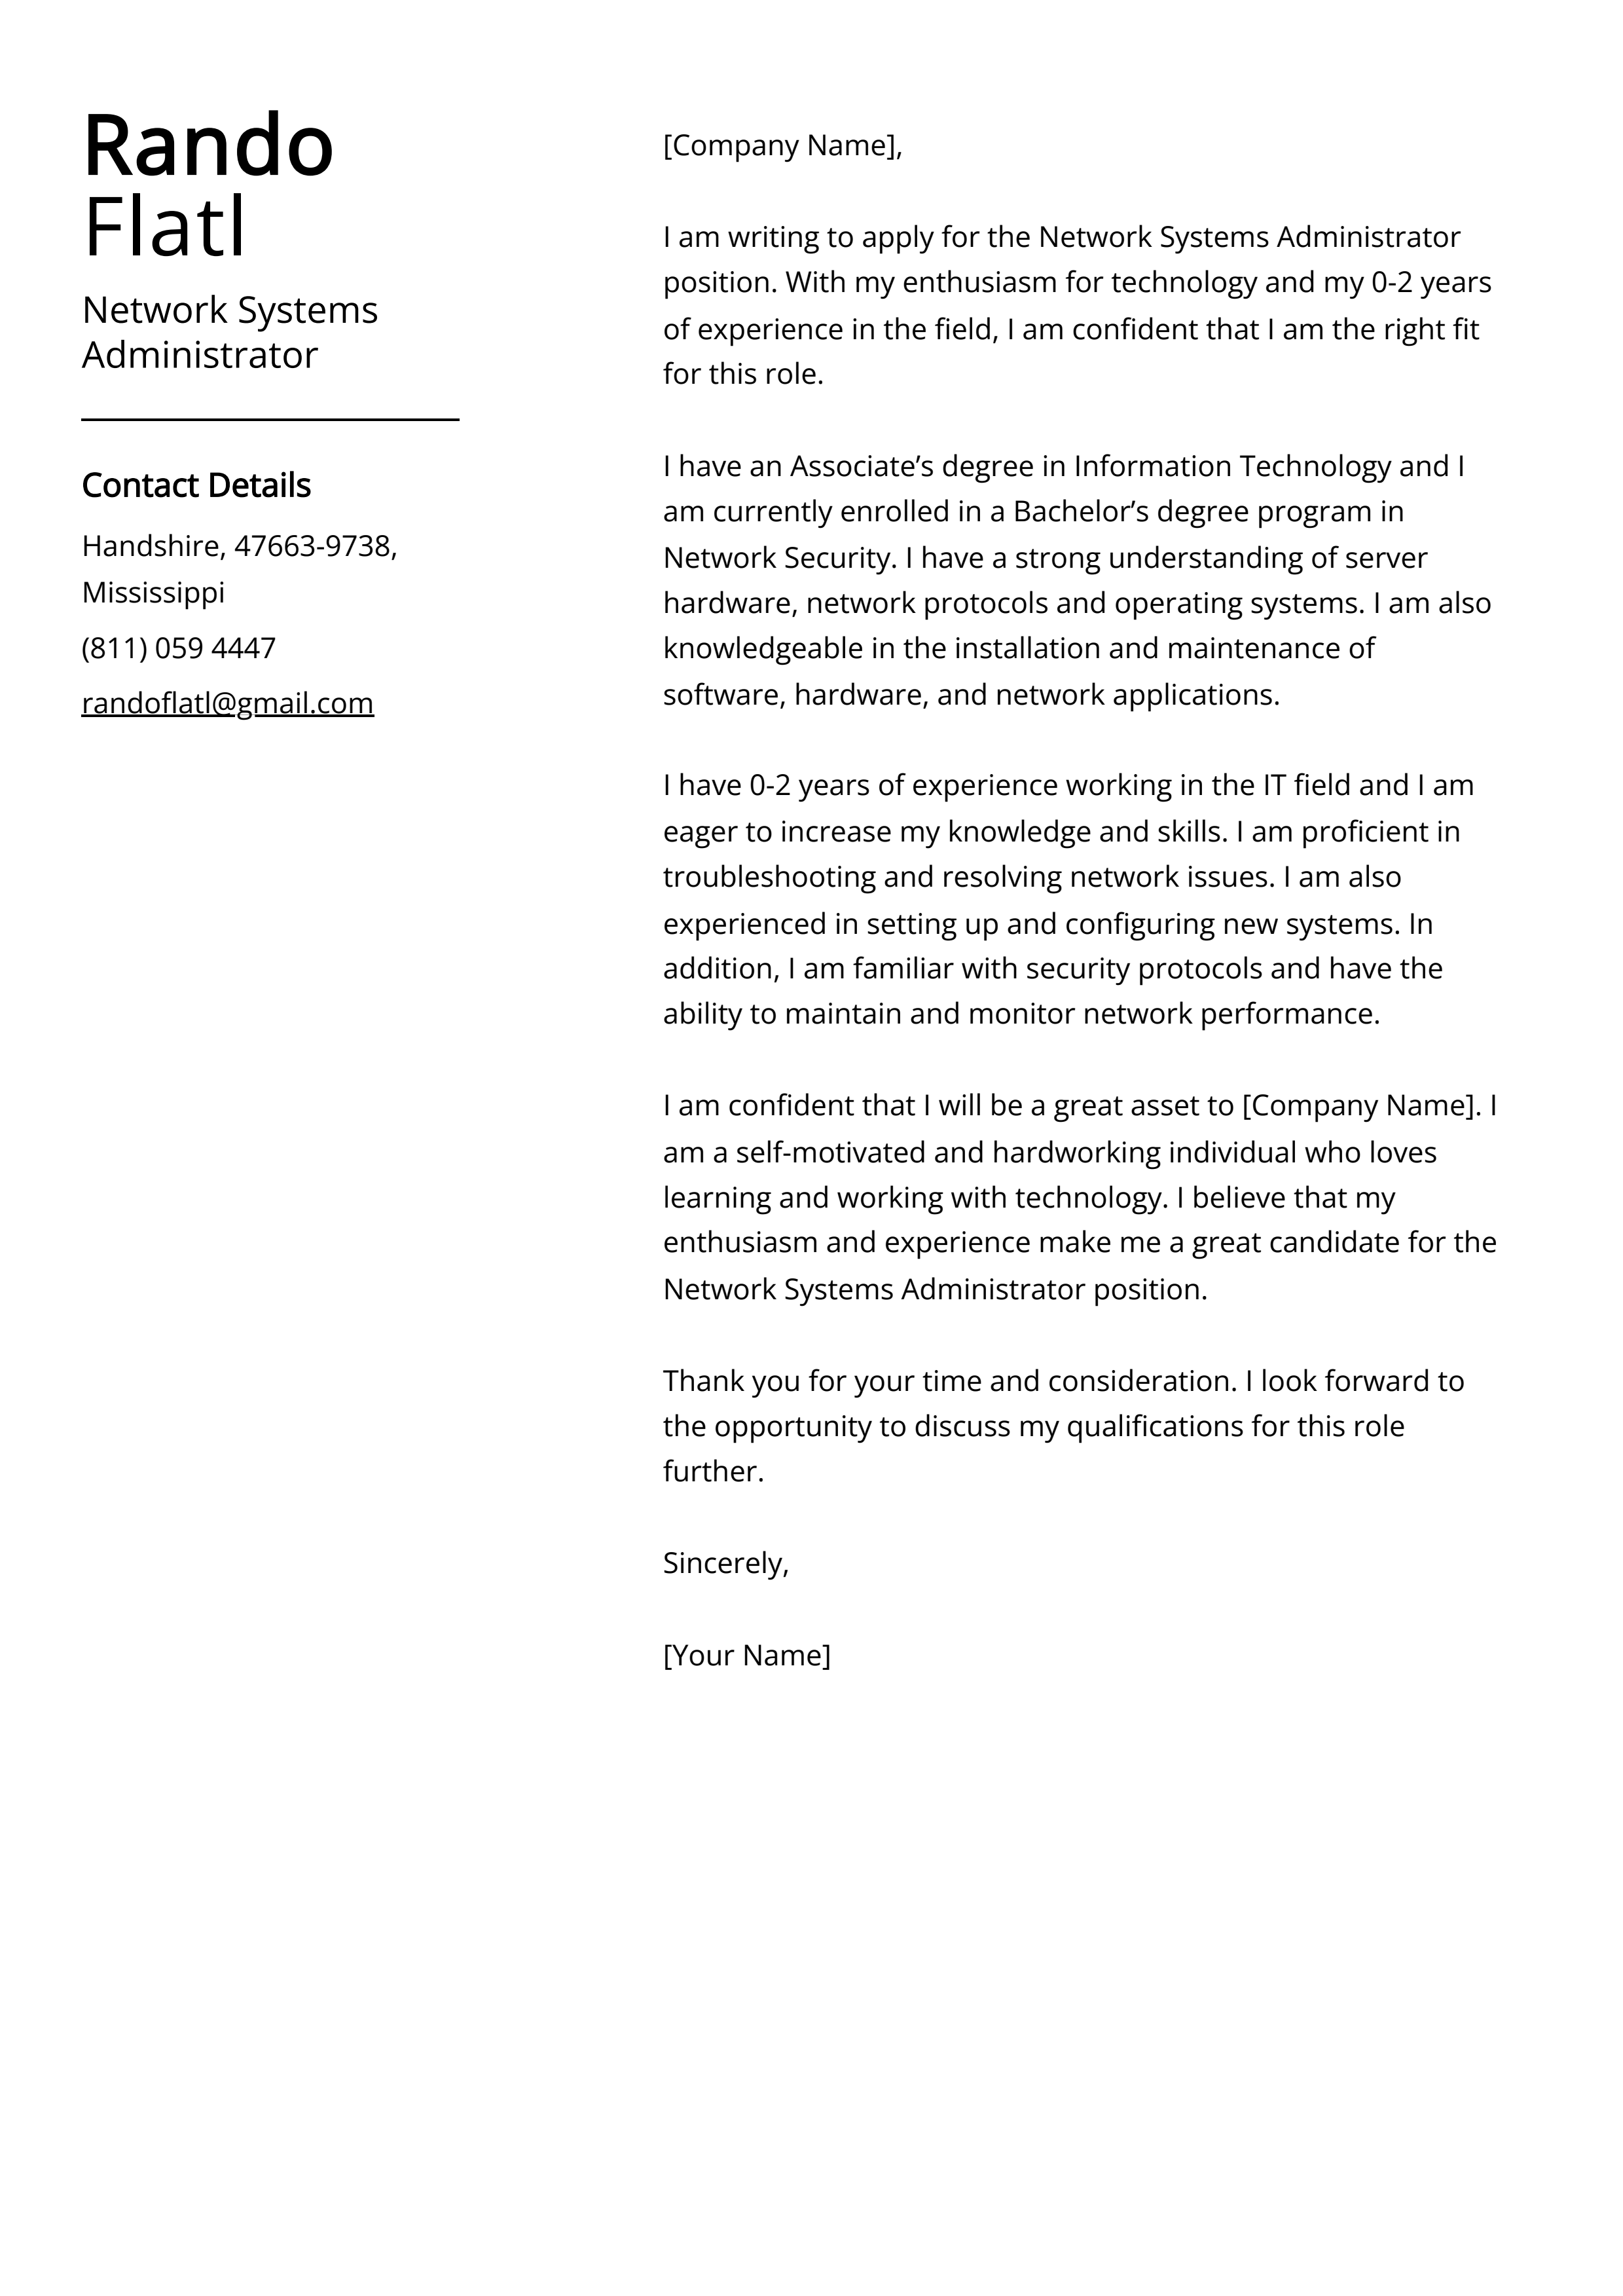 Network Systems Administrator Cover Letter Example